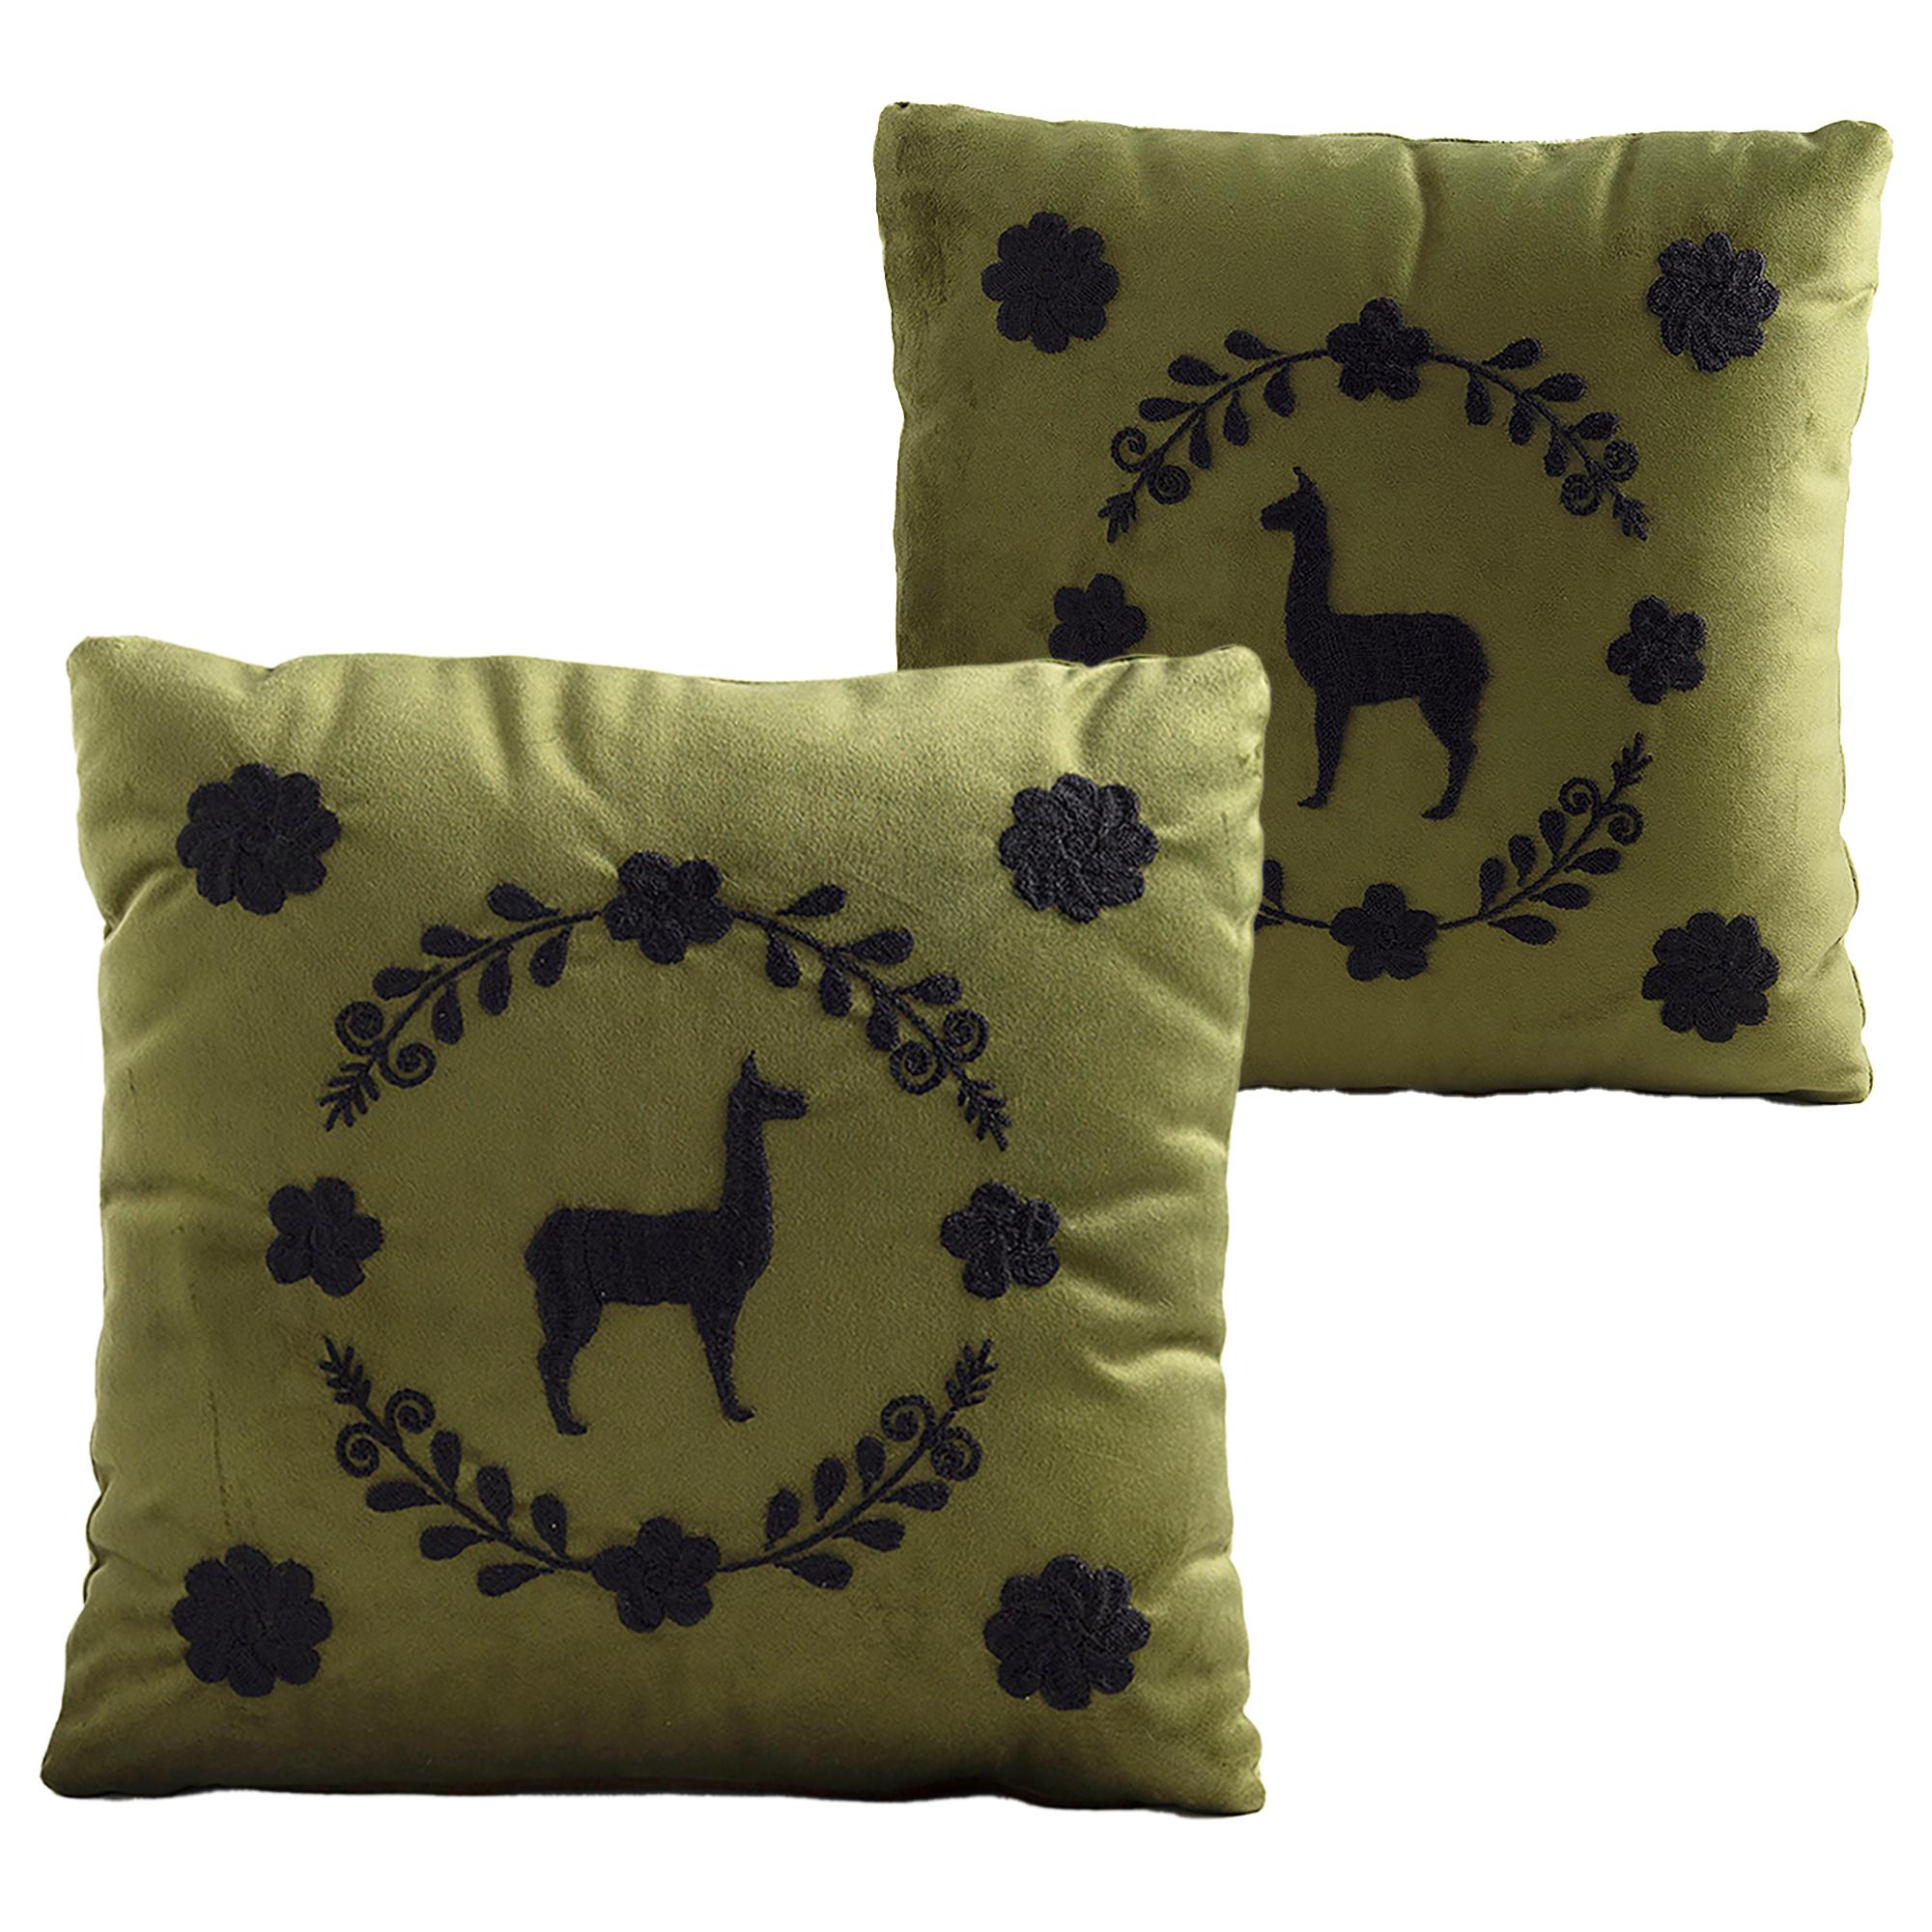 LLAMA Hand Embroidered Decorative Pillows in Olive Velvet by ANDEAN, Set of 2